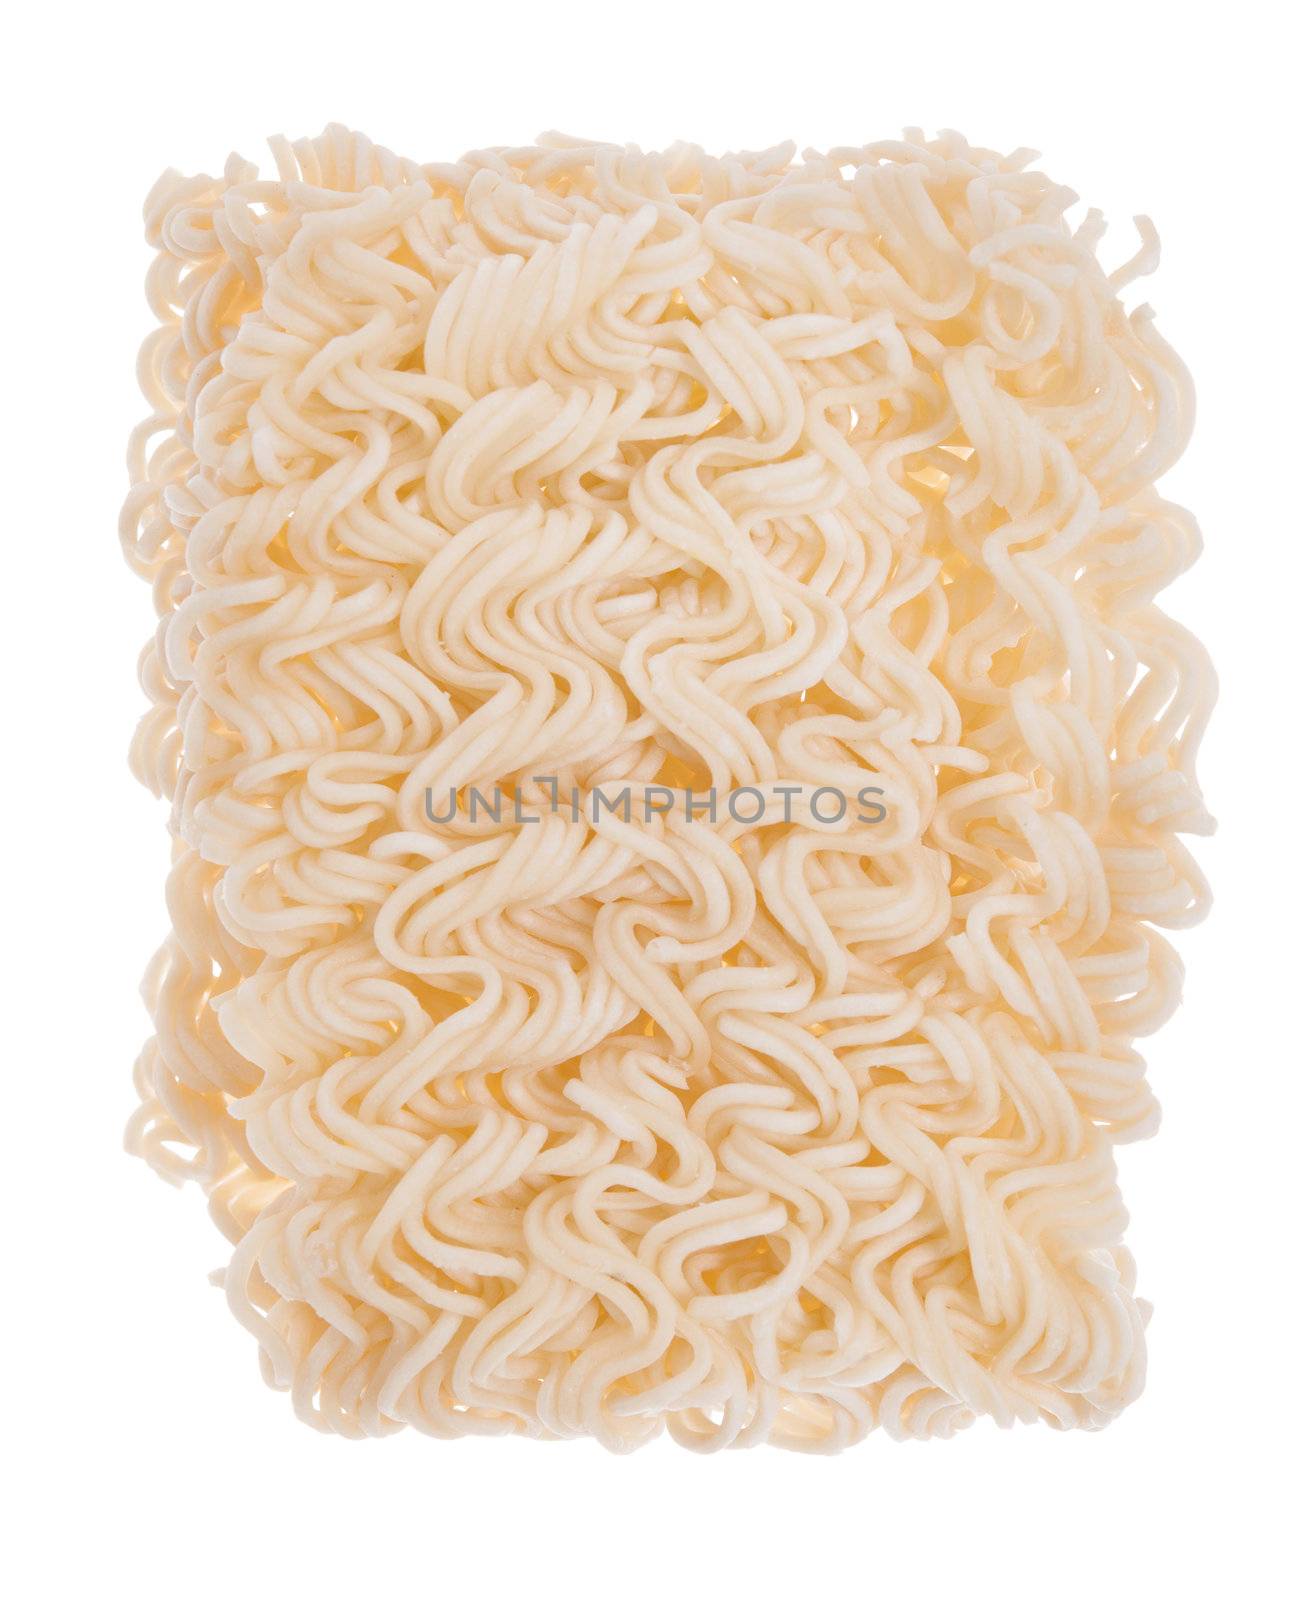 A block of Asian ramen instant noodles isolated on white background